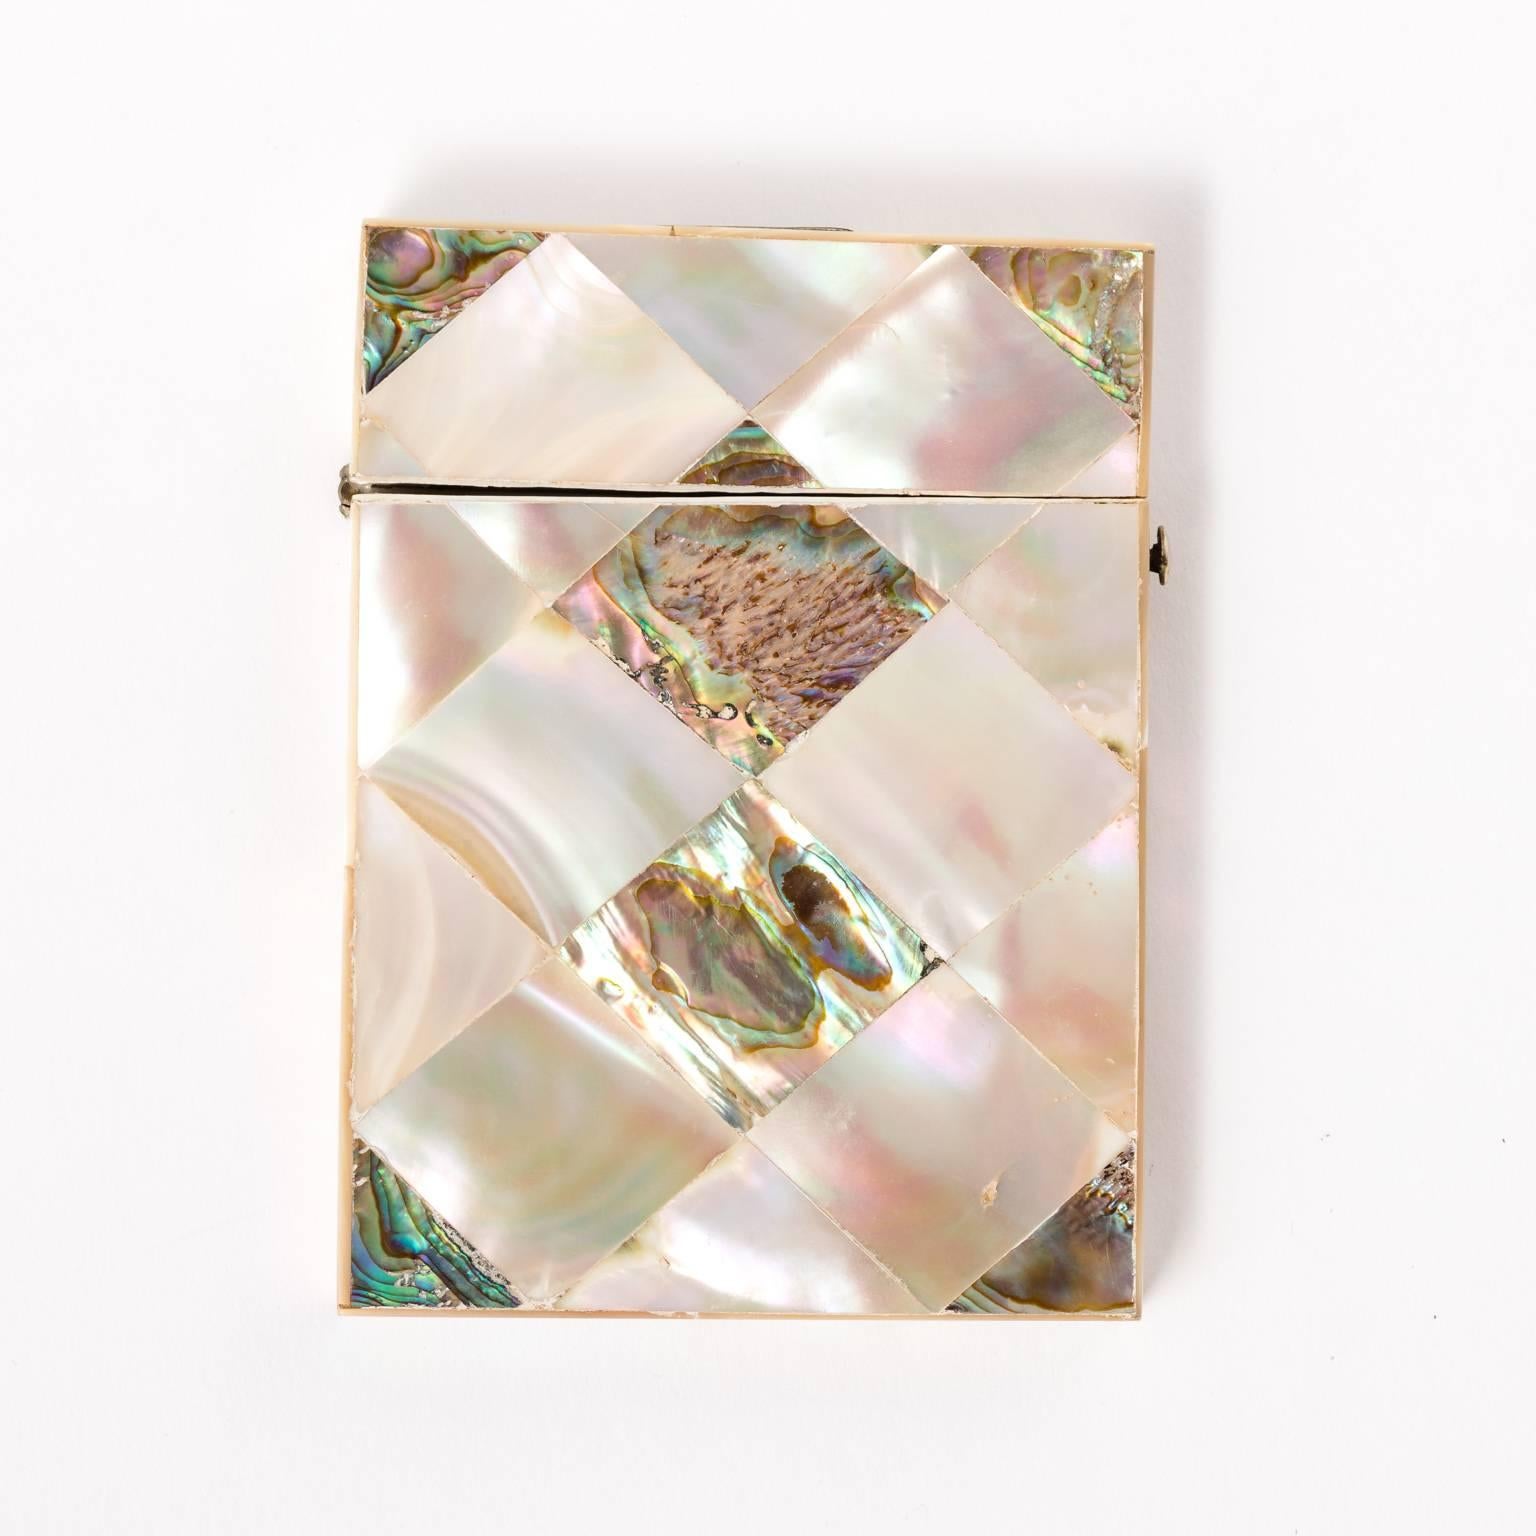 Circa early 20th-century mother of pearl card case
